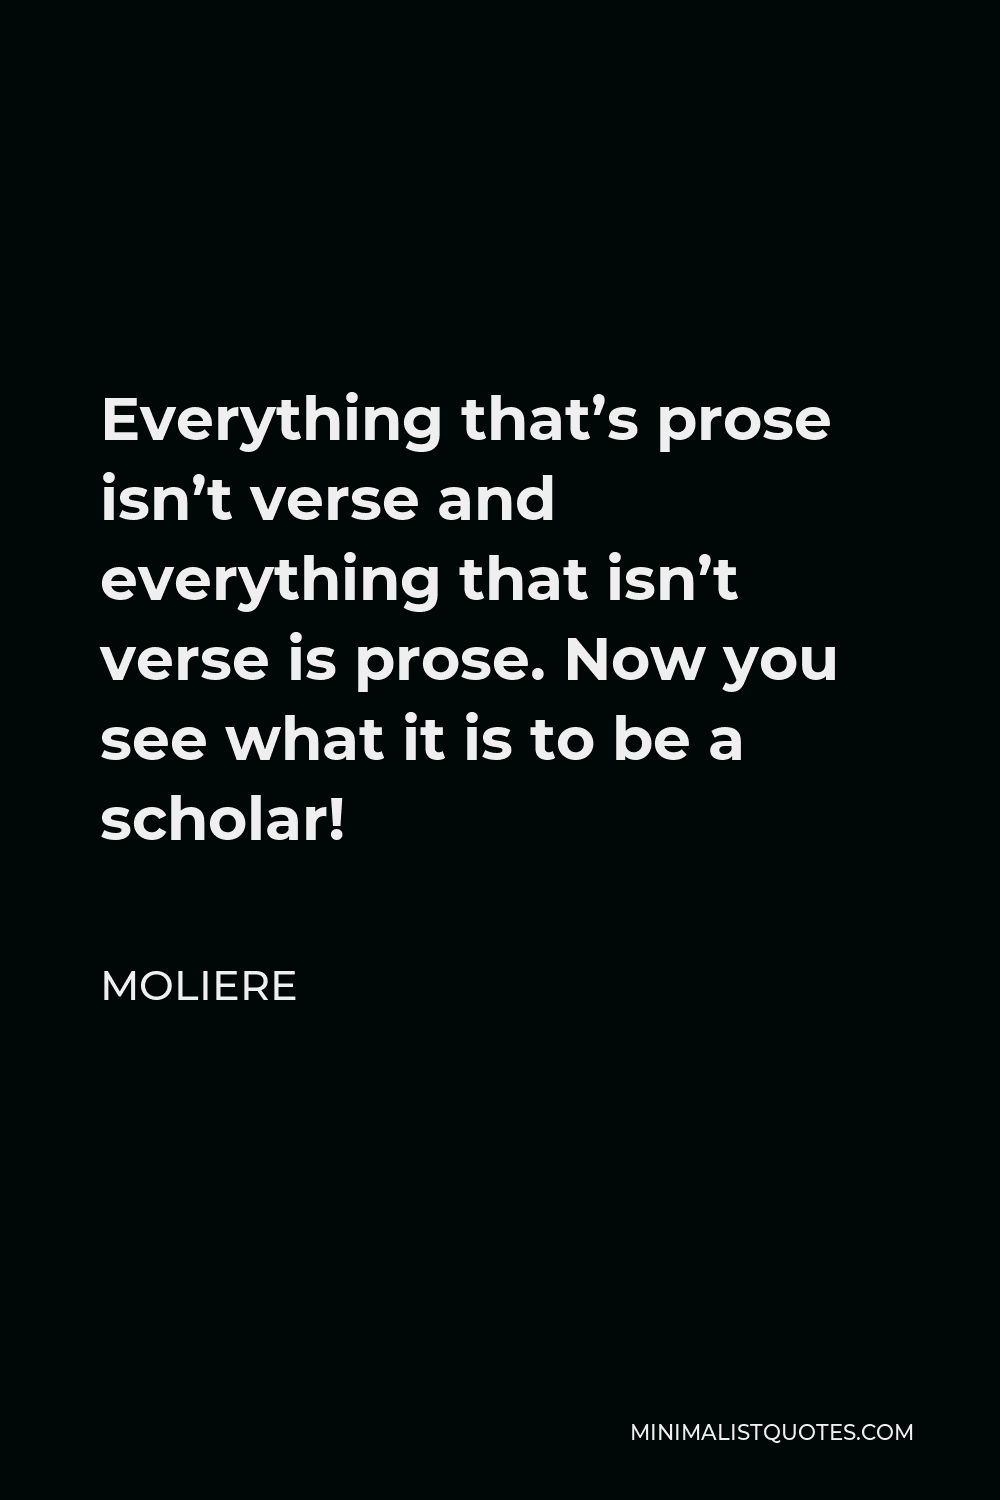 Moliere Quote - Everything that’s prose isn’t verse and everything that isn’t verse is prose. Now you see what it is to be a scholar!